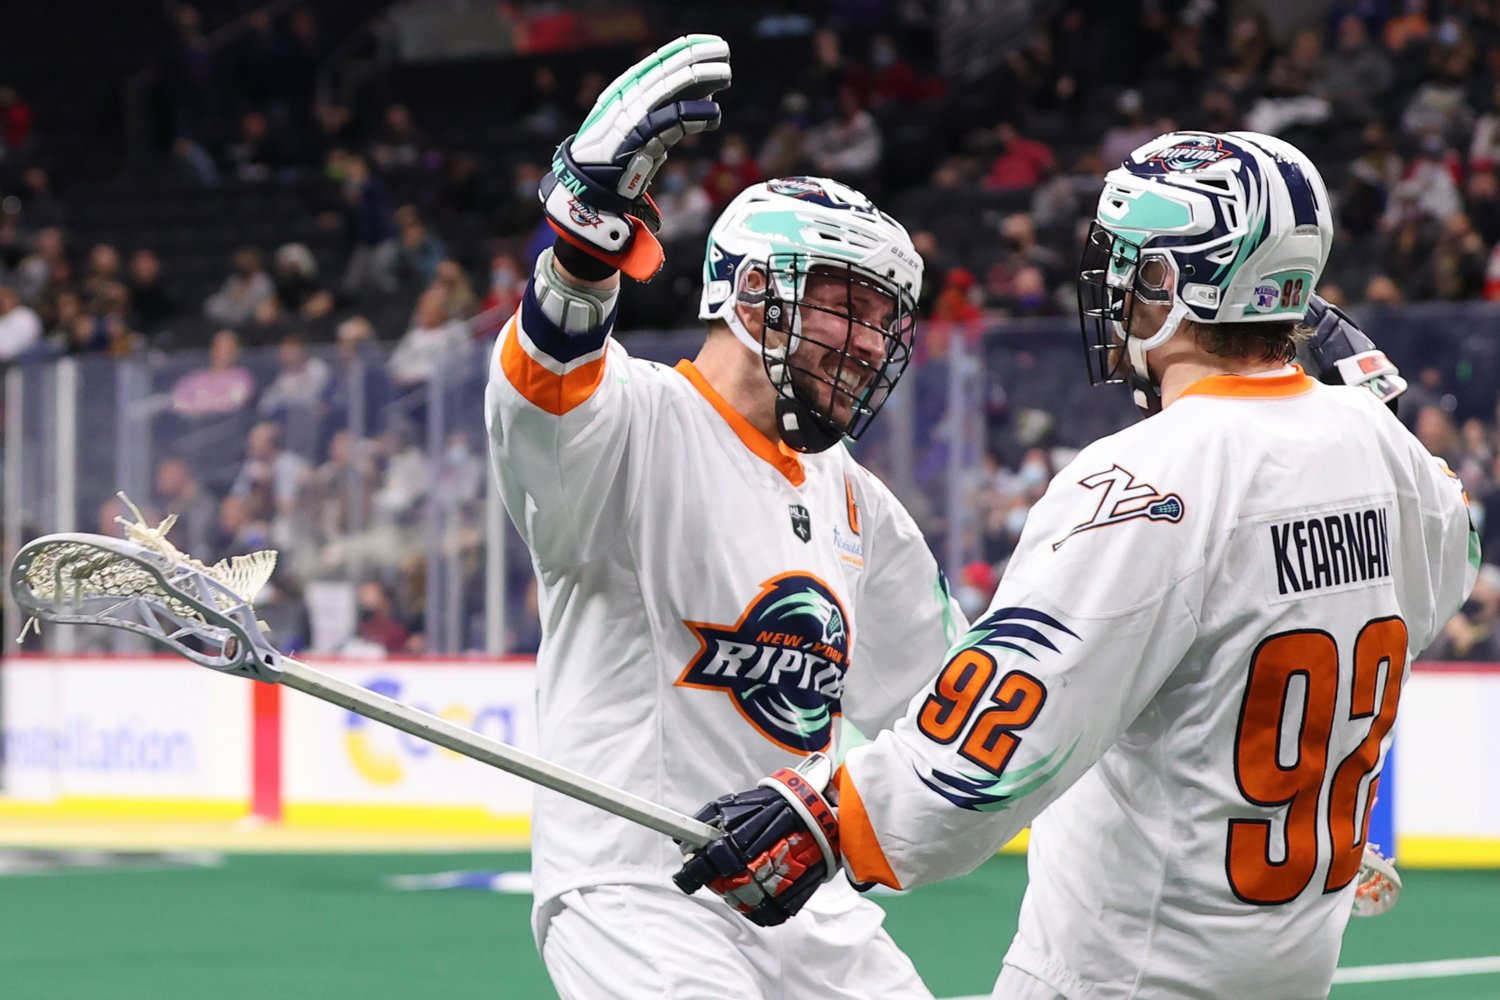 Connor Kearnan, right, celebrated with Dan MacRae after one of Kearnan's four goals in the Riptide's 13-12 win at Philadelphia on Sunday afternoon.